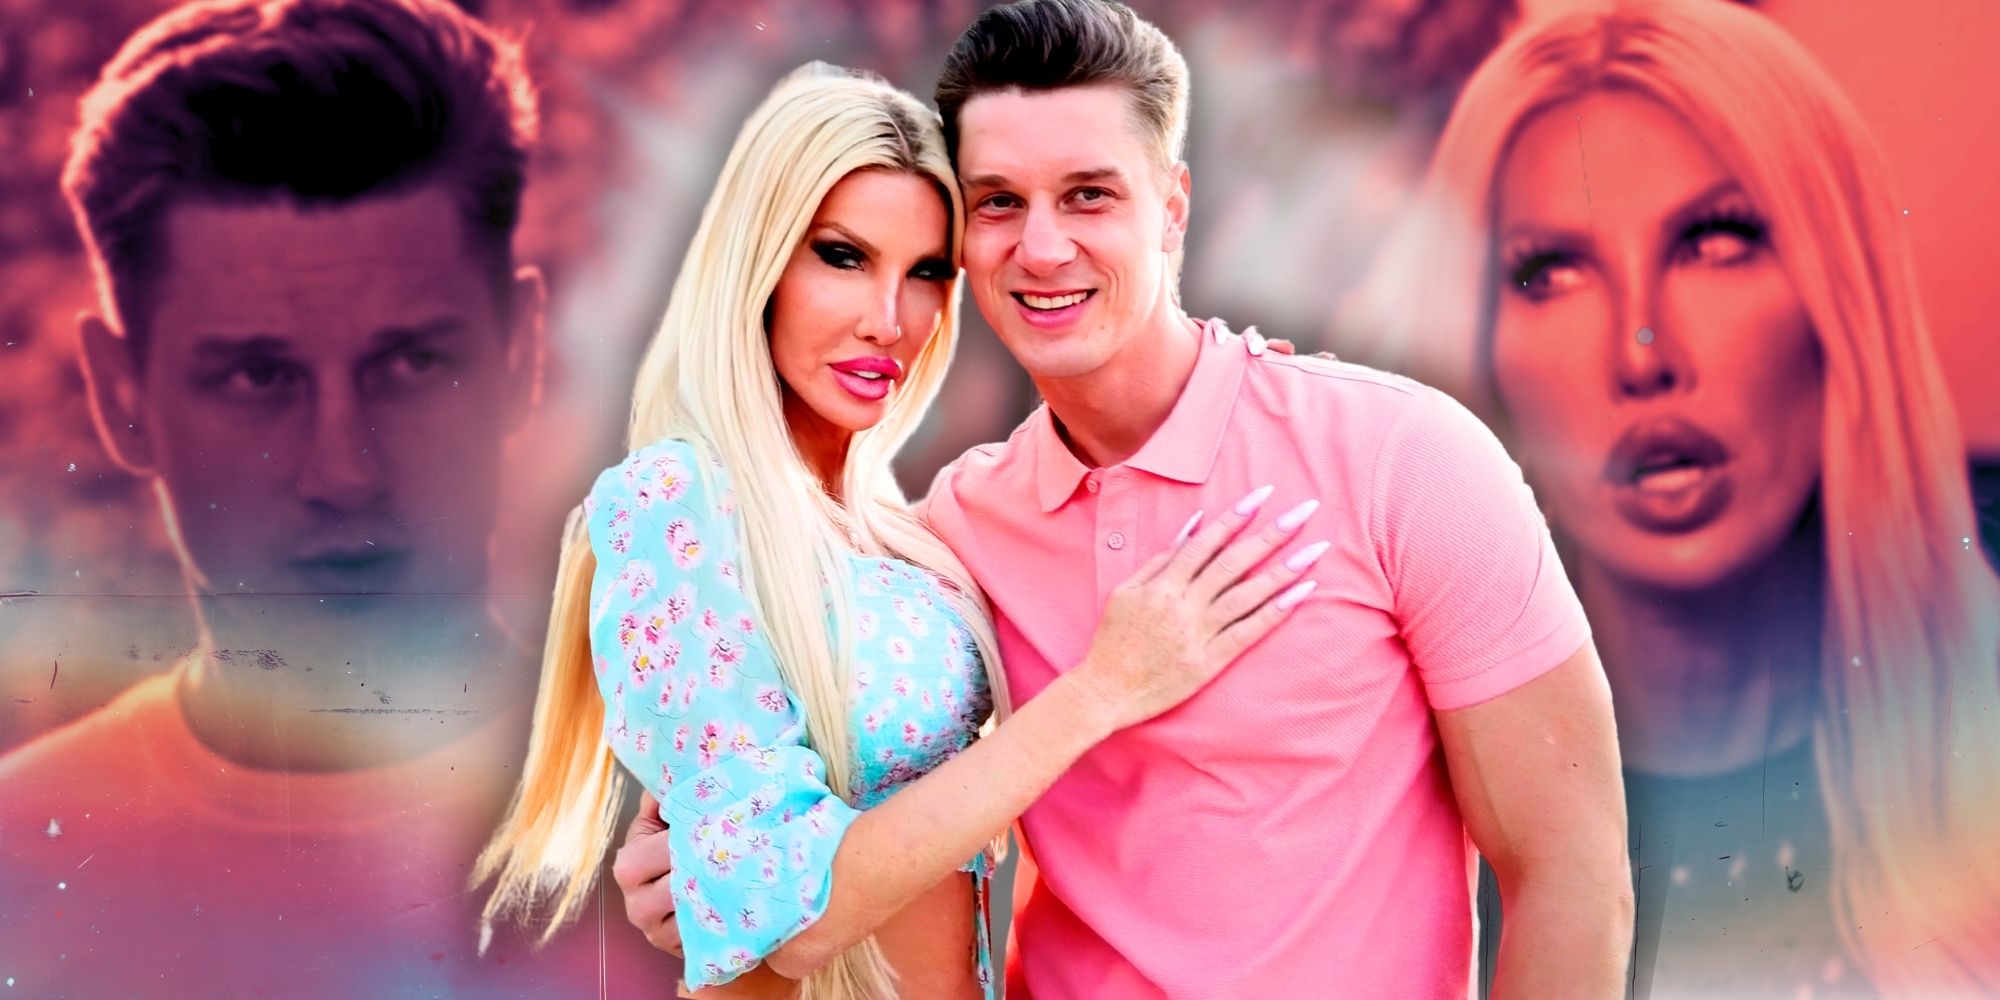 90 Day Fiancé stars Nikki Exotika dressed in floral blue dress & Igor AKA Justin in pink shirt hugging and smiling